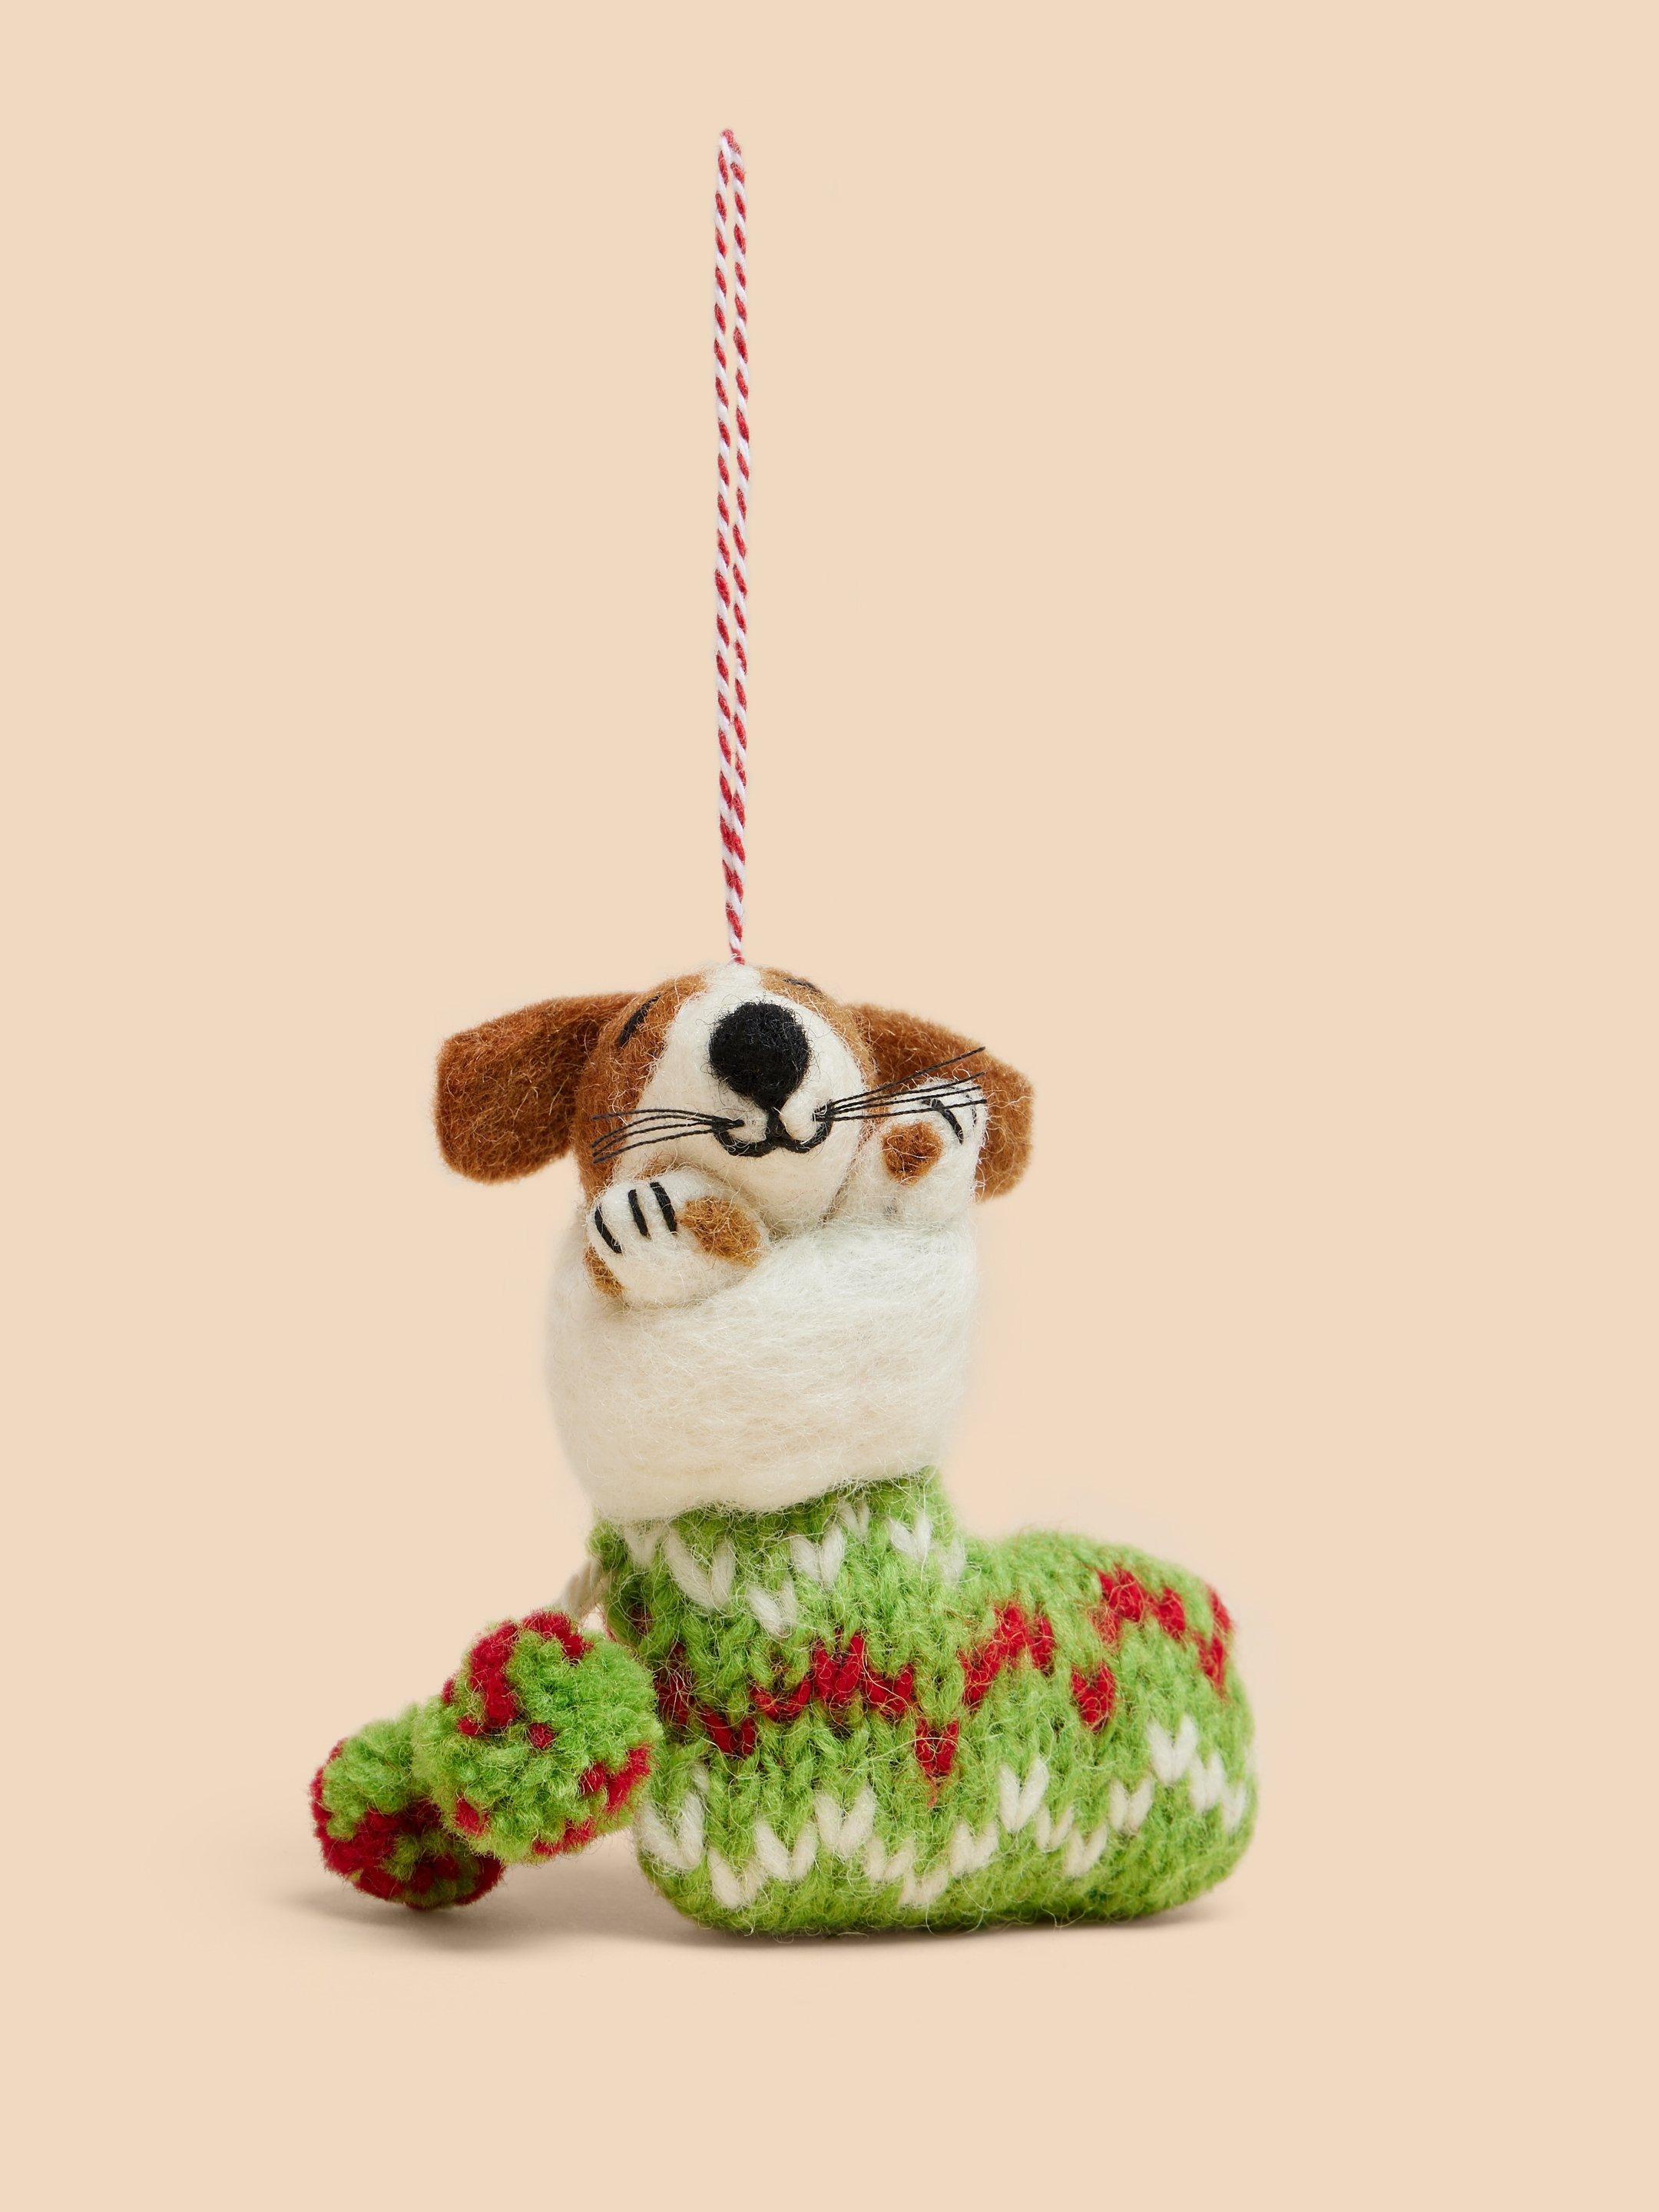 Dog in a Stocking Hanging Dec